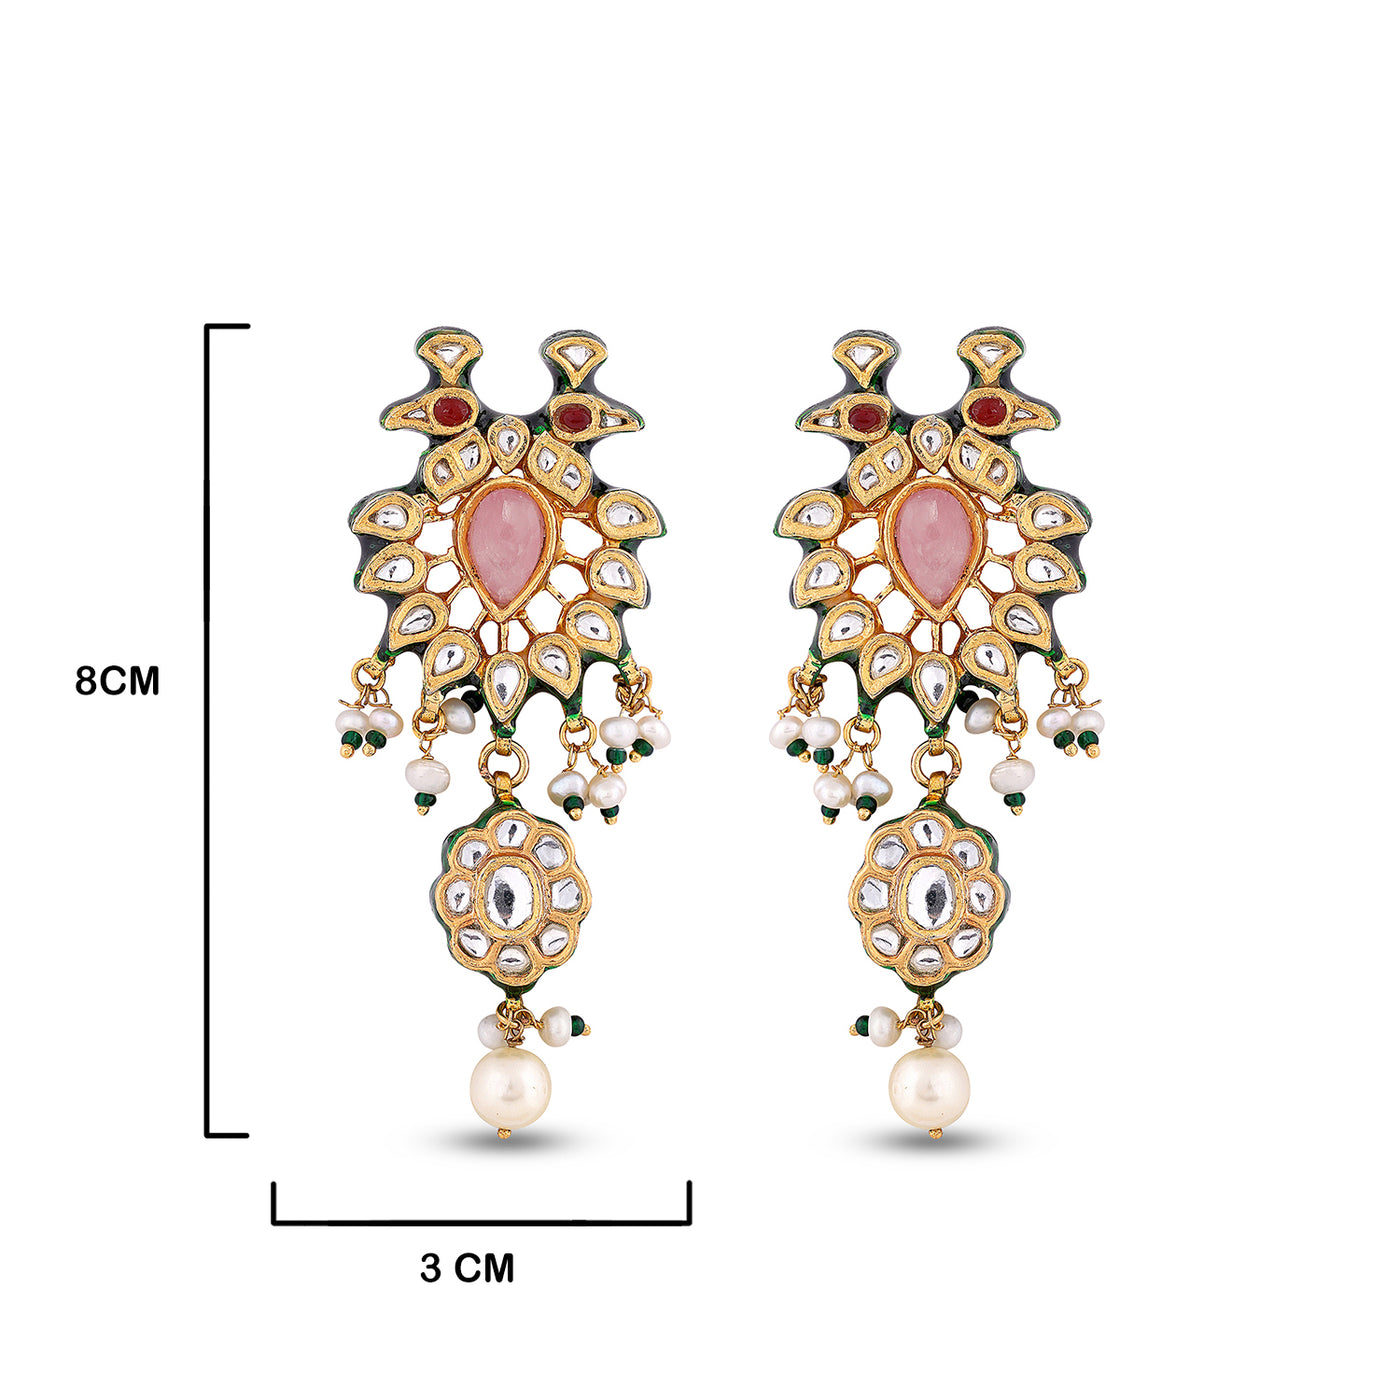 Pink Stone Pearl Earrings with measurements in cm. 8cm by 3cm.